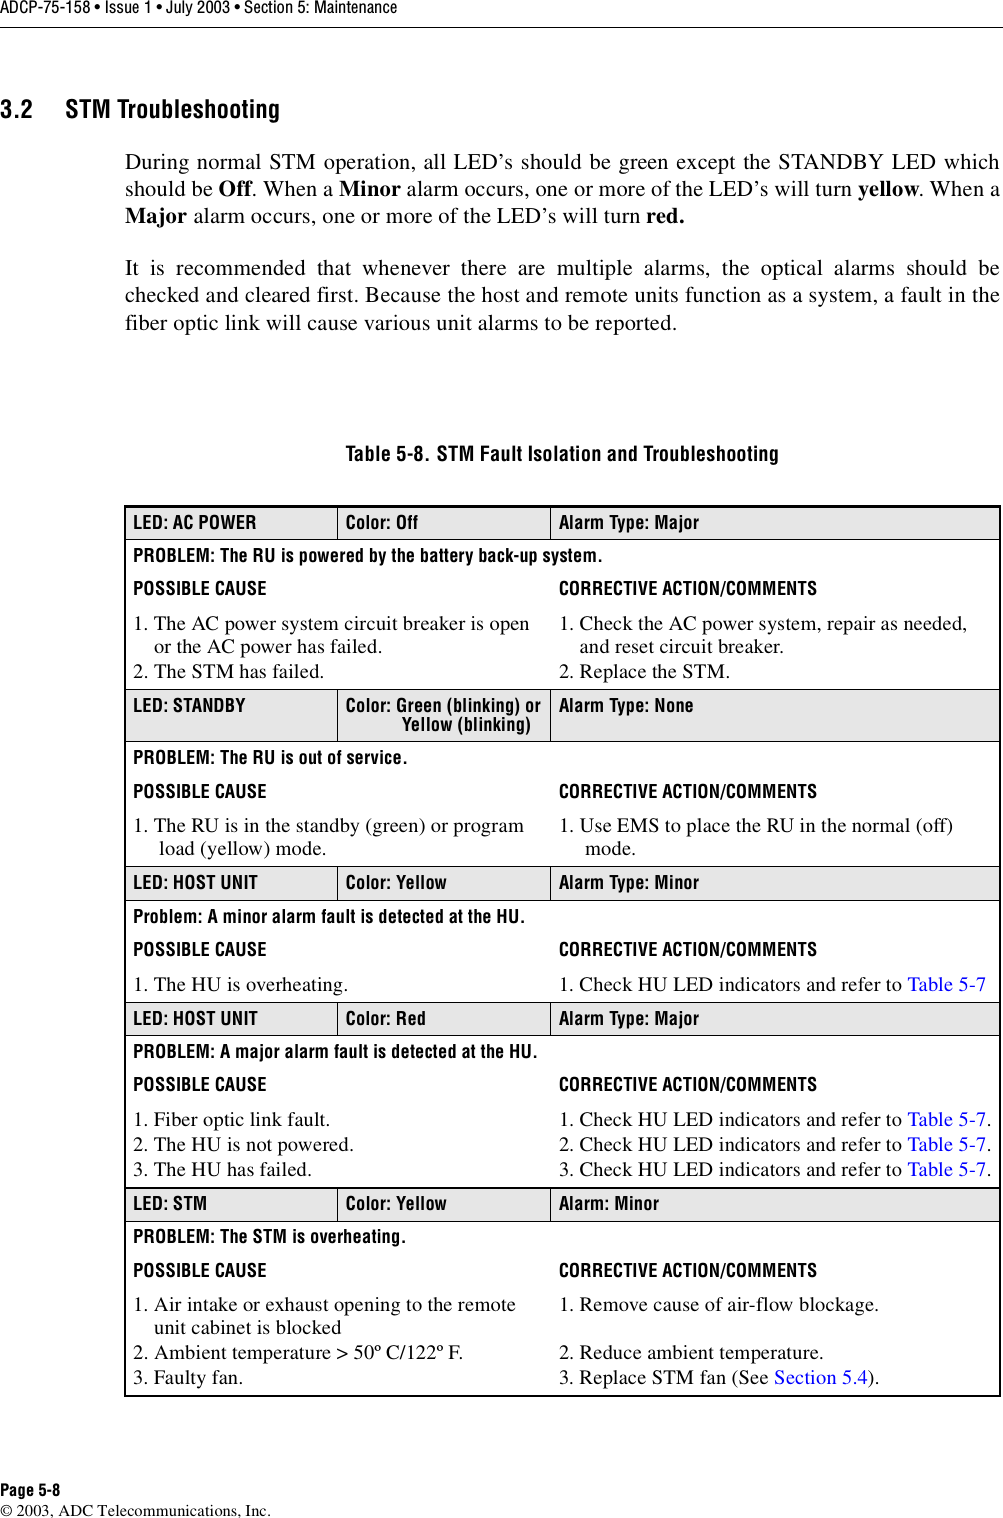 ADCP-75-158 • Issue 1 • July 2003 • Section 5: MaintenancePage 5-8© 2003, ADC Telecommunications, Inc.3.2 STM TroubleshootingDuring normal STM operation, all LED’s should be green except the STANDBY LED whichshould be Off. When a Minor alarm occurs, one or more of the LED’s will turn yellow. When aMajor alarm occurs, one or more of the LED’s will turn red. It is recommended that whenever there are multiple alarms, the optical alarms should bechecked and cleared first. Because the host and remote units function as a system, a fault in thefiber optic link will cause various unit alarms to be reported. Table 5-8. STM Fault Isolation and TroubleshootingLED: AC POWER Color: Off Alarm Type: MajorPROBLEM: The RU is powered by the battery back-up system.POSSIBLE CAUSE CORRECTIVE ACTION/COMMENTS1. The AC power system circuit breaker is open    or the AC power has failed. 2. The STM has failed. 1. Check the AC power system, repair as needed,     and reset circuit breaker. 2. Replace the STM. LED: STANDBY Color: Green (blinking) or            Yellow (blinking)Alarm Type: NonePROBLEM: The RU is out of service.POSSIBLE CAUSE CORRECTIVE ACTION/COMMENTS1. The RU is in the standby (green) or program     load (yellow) mode.  1. Use EMS to place the RU in the normal (off)     mode.LED: HOST UNIT Color: Yellow Alarm Type: MinorProblem: A minor alarm fault is detected at the HU. POSSIBLE CAUSE CORRECTIVE ACTION/COMMENTS1. The HU is overheating.  1. Check HU LED indicators and refer to Table 5-7 LED: HOST UNIT Color: Red Alarm Type: MajorPROBLEM: A major alarm fault is detected at the HU. POSSIBLE CAUSE CORRECTIVE ACTION/COMMENTS1. Fiber optic link fault. 2. The HU is not powered. 3. The HU has failed. 1. Check HU LED indicators and refer to Table 5-7.2. Check HU LED indicators and refer to Table 5-7.3. Check HU LED indicators and refer to Table 5-7.LED: STM Color: Yellow Alarm: MinorPROBLEM: The STM is overheating.POSSIBLE CAUSE CORRECTIVE ACTION/COMMENTS1. Air intake or exhaust opening to the remote    unit cabinet is blocked2. Ambient temperature &gt; 50º C/122º F. 3. Faulty fan. 1. Remove cause of air-flow blockage. 2. Reduce ambient temperature.3. Replace STM fan (See Section 5.4).